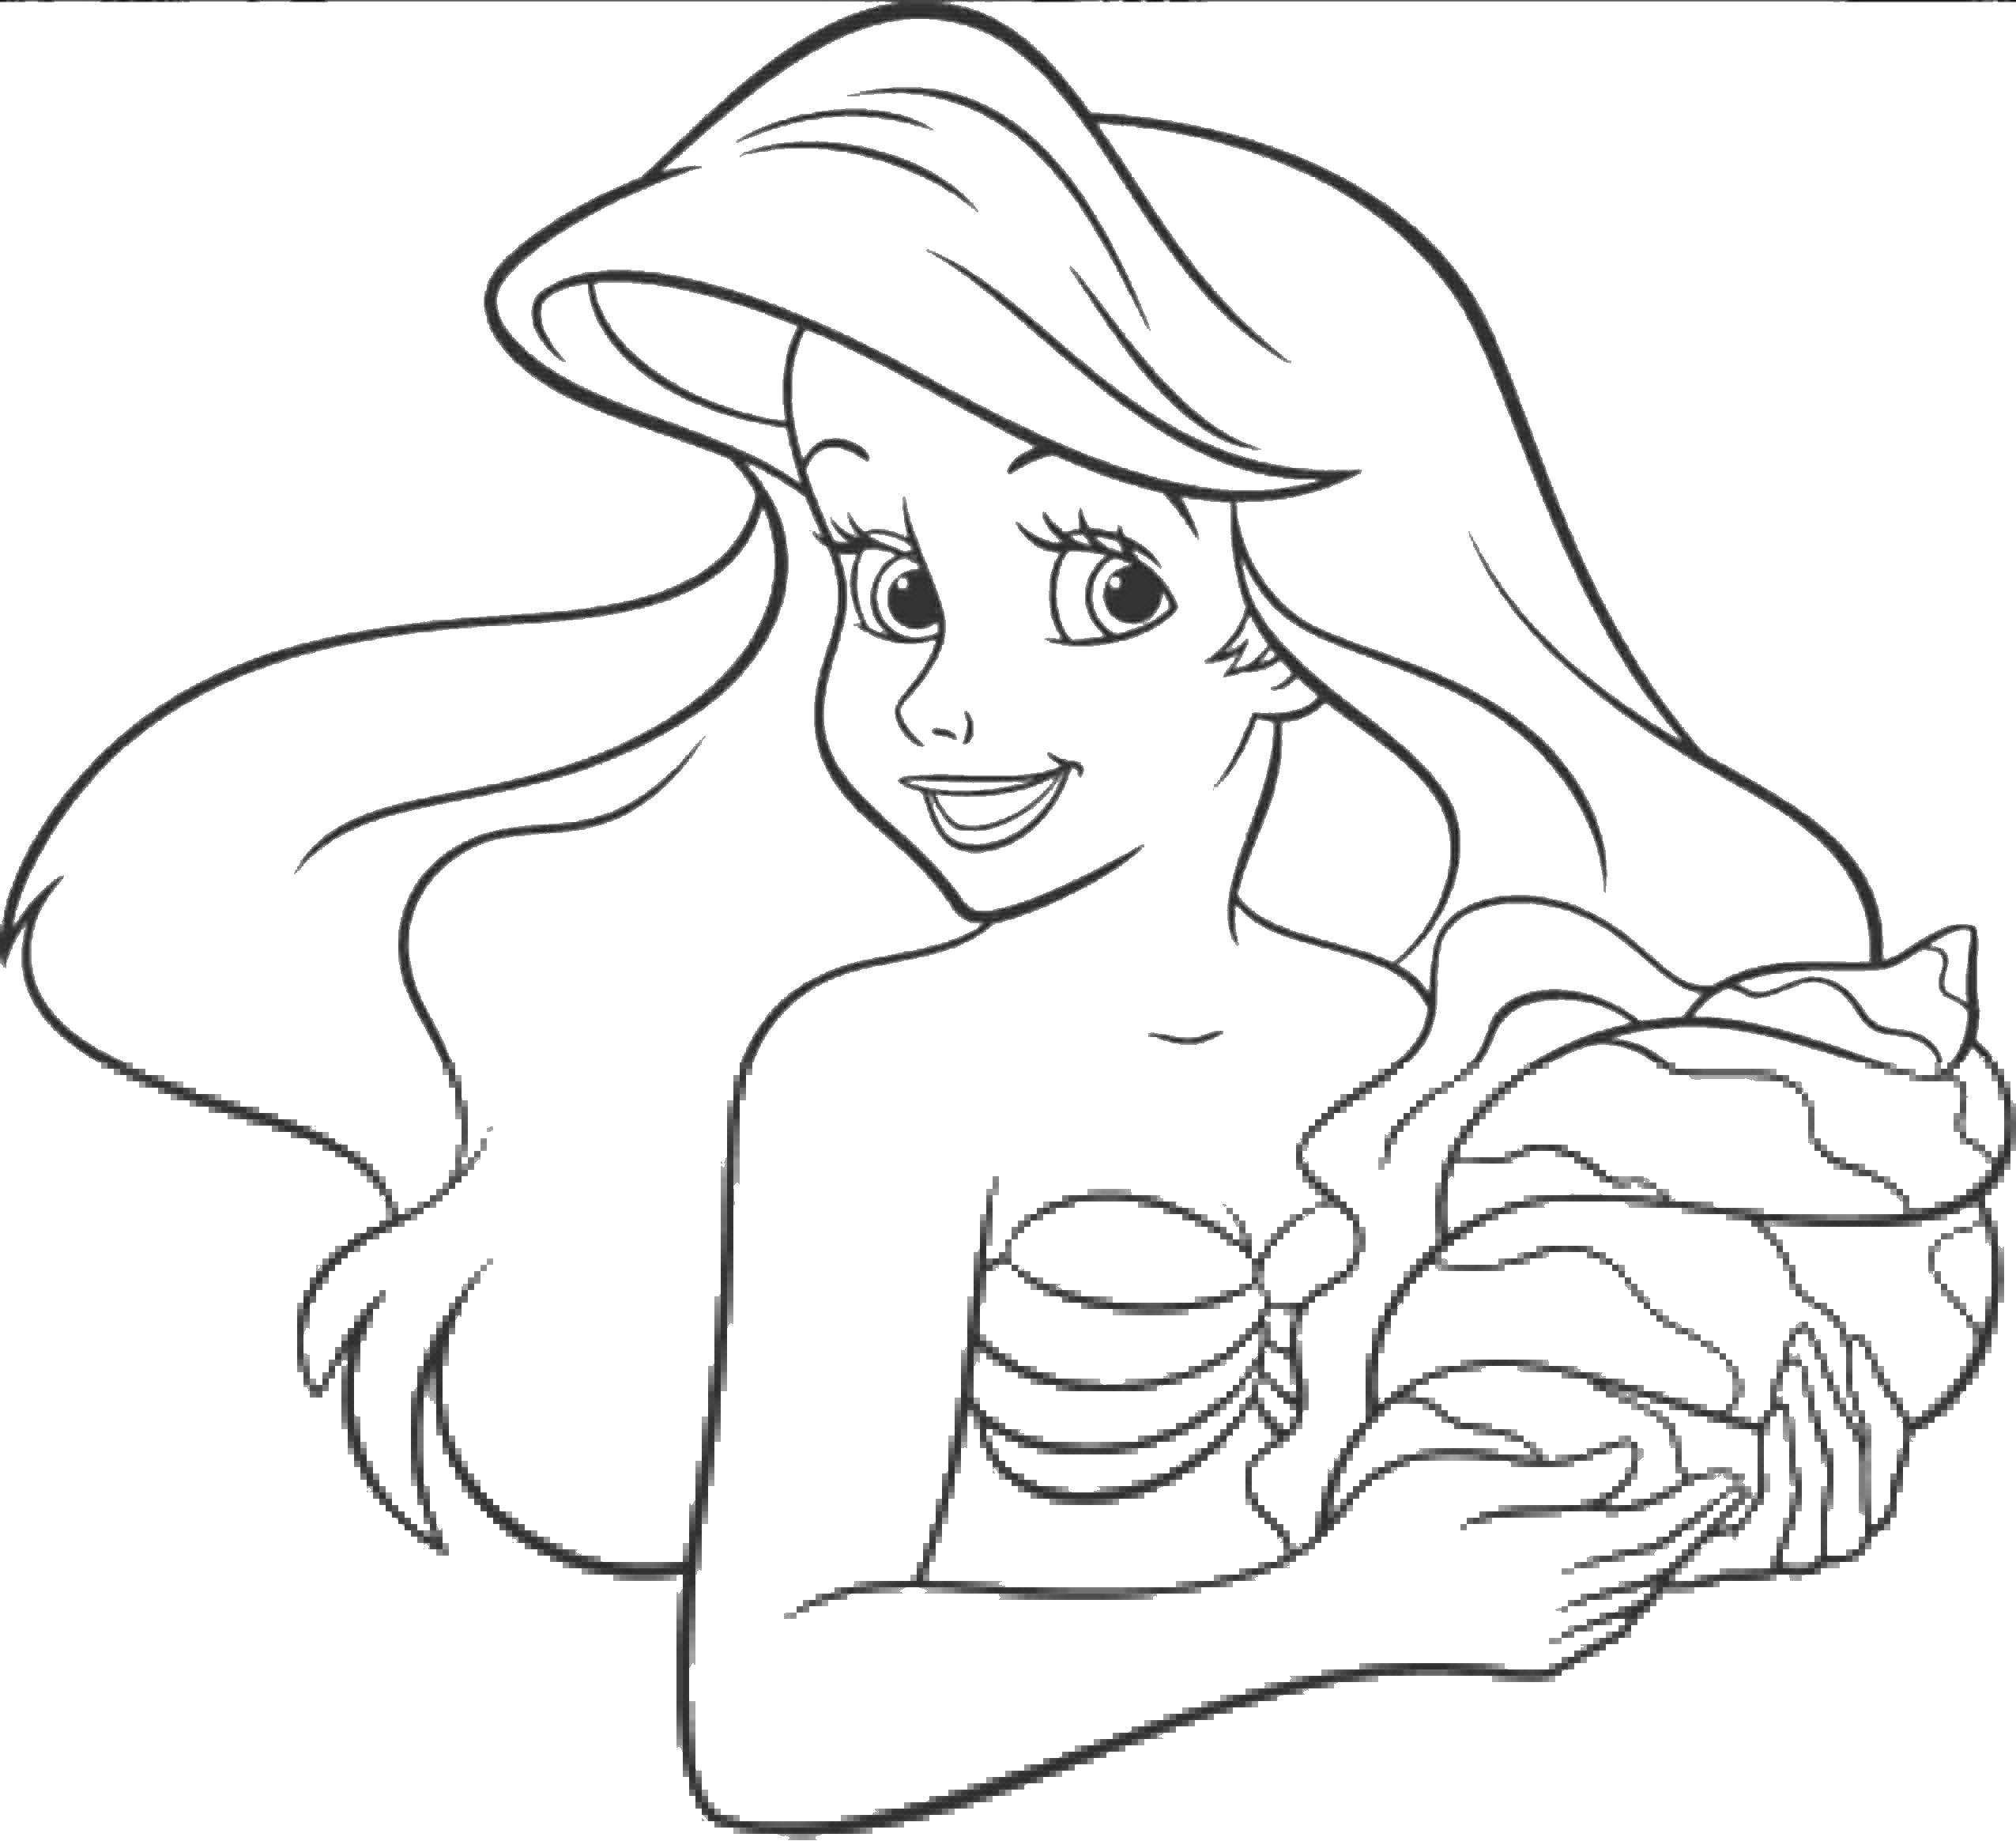 Coloring Large shell Ariel. Category The little mermaid. Tags:  Disney, the little mermaid, Ariel.